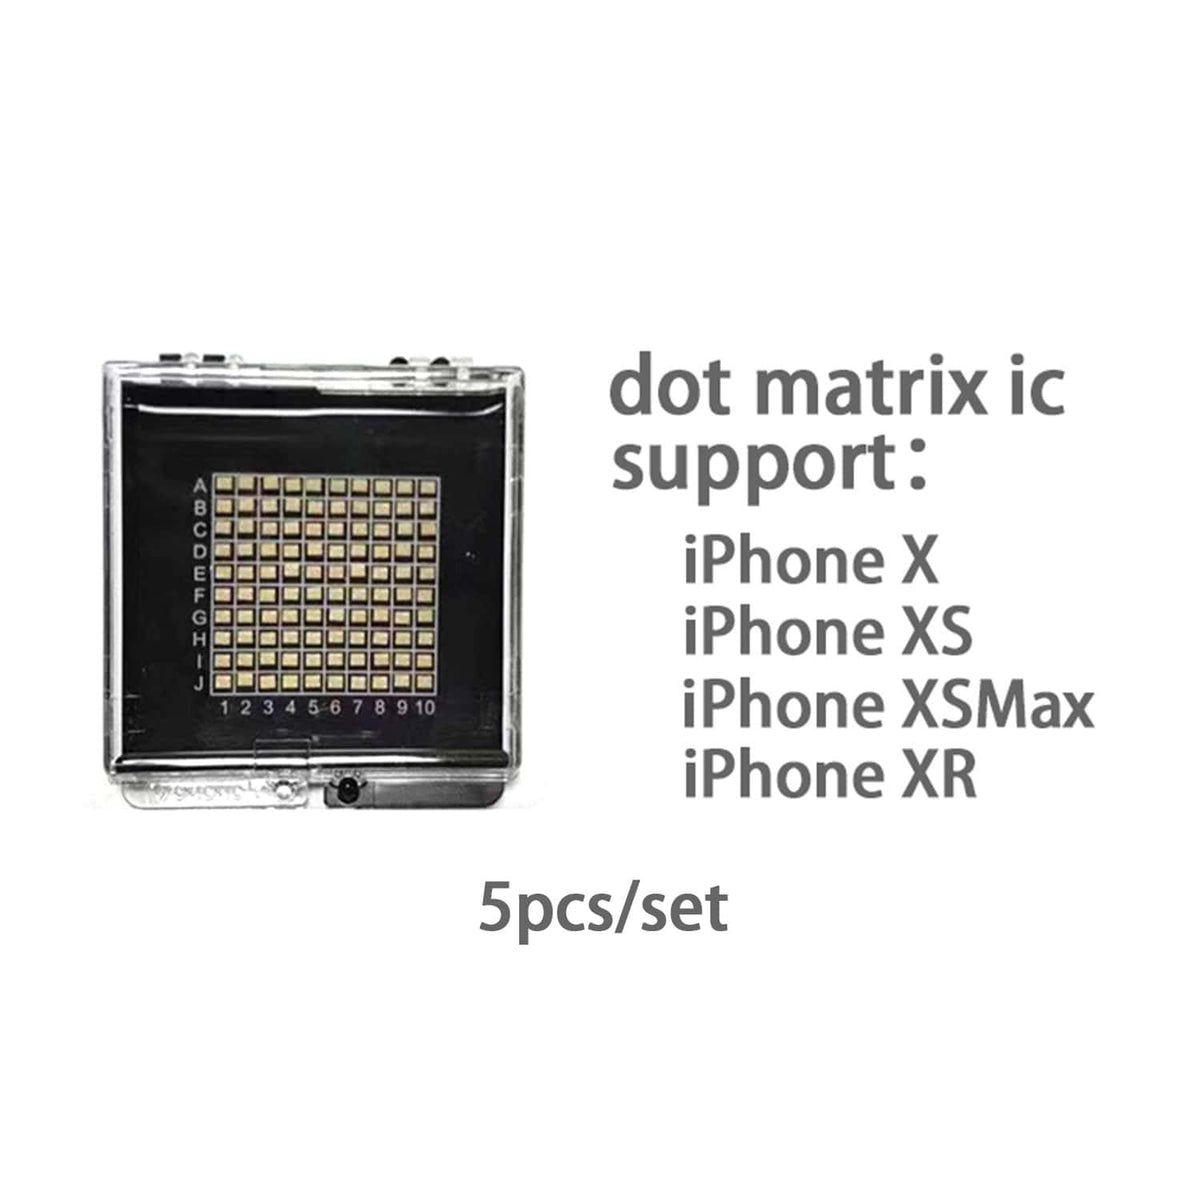 LUBAN IFACE PRO MATRIX TESTER DOT PROJECTOR IC  FOR IPHONE X/XS/XSMAX/XR